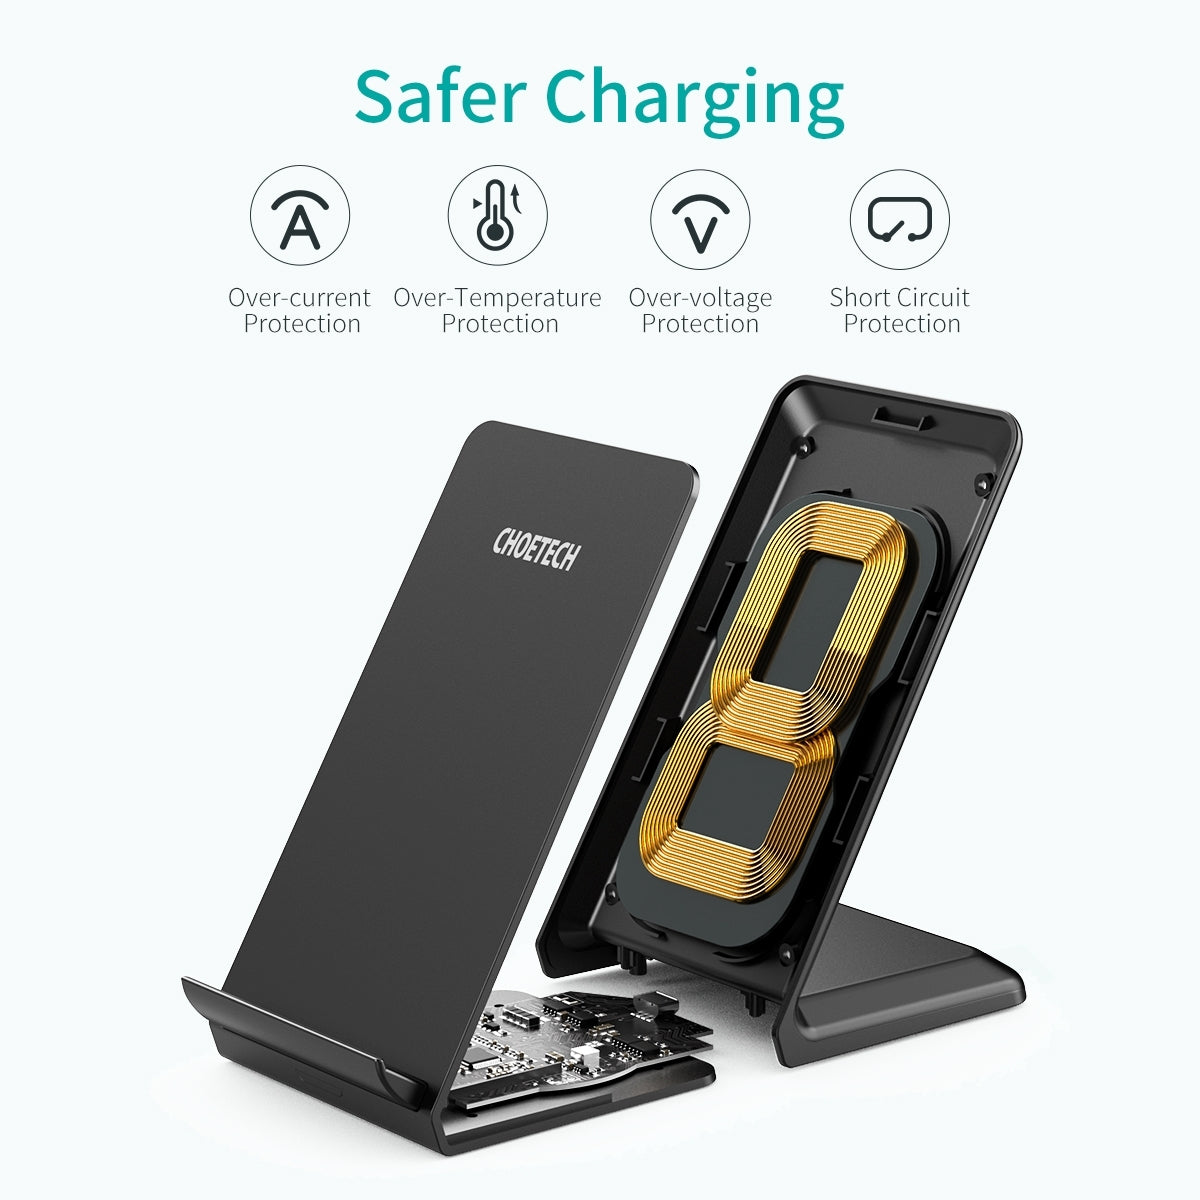 CHOETECH T524S 10W/7.5W Fast Wireless Charging Stand with AC Adapter